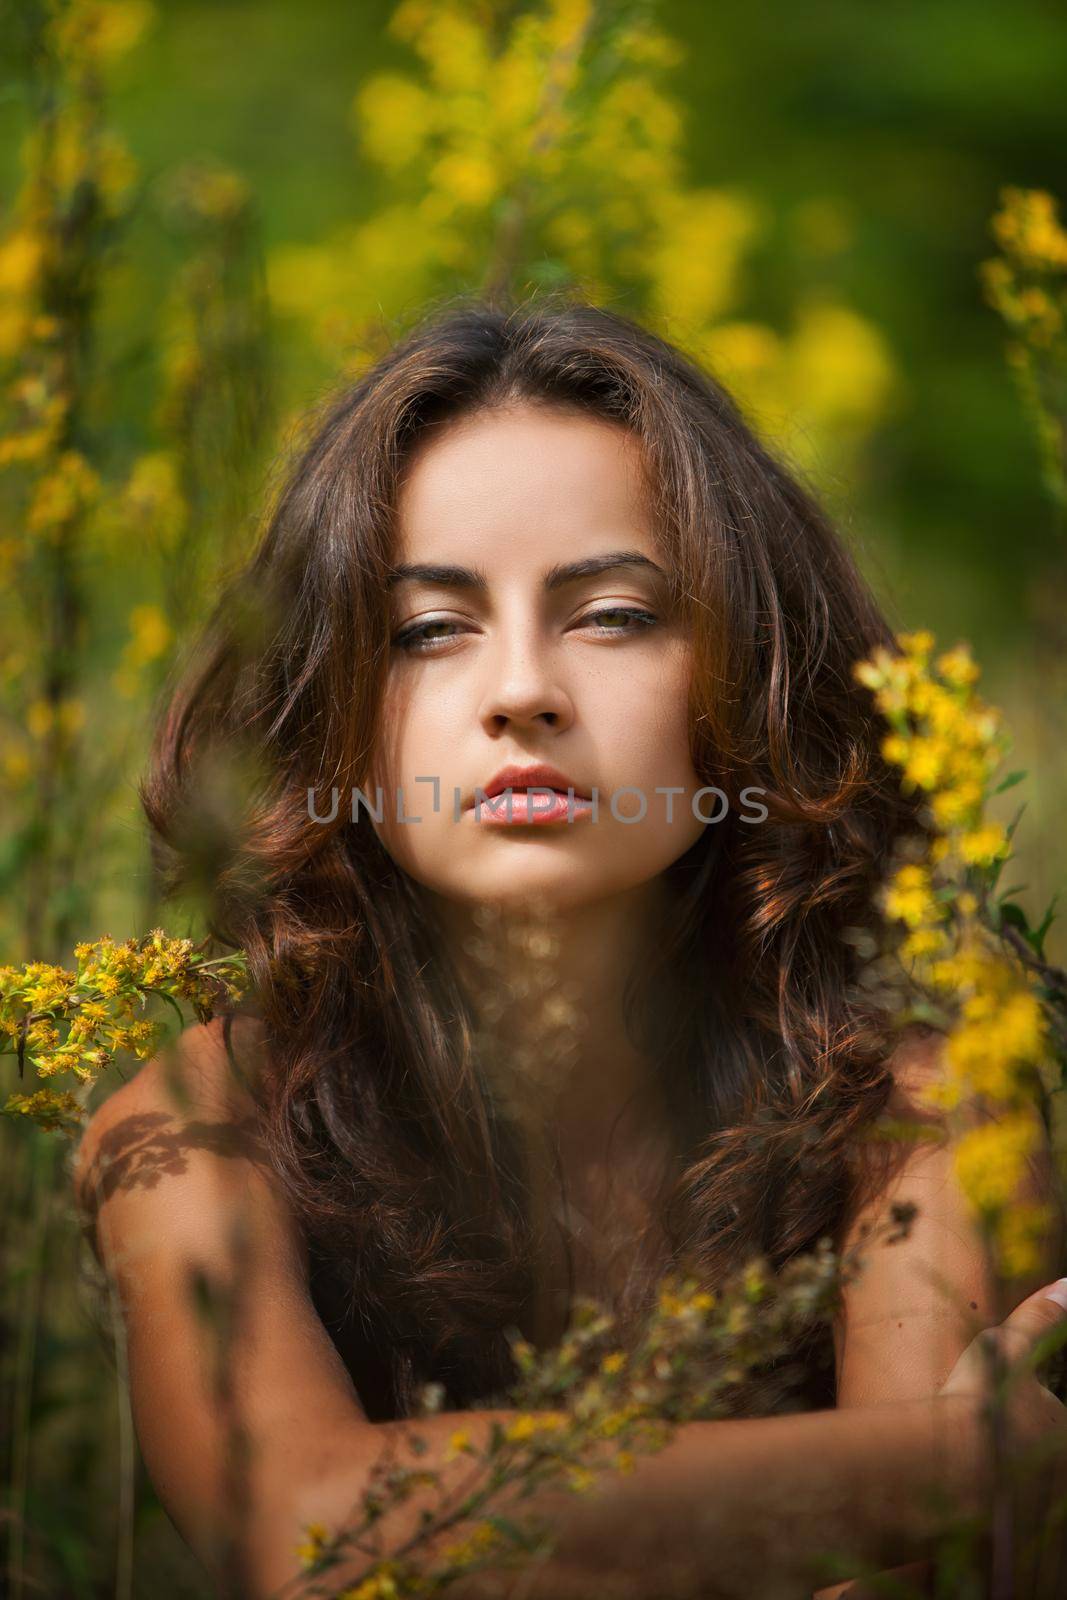 Portrait of a young woman on flowers field by palinchak